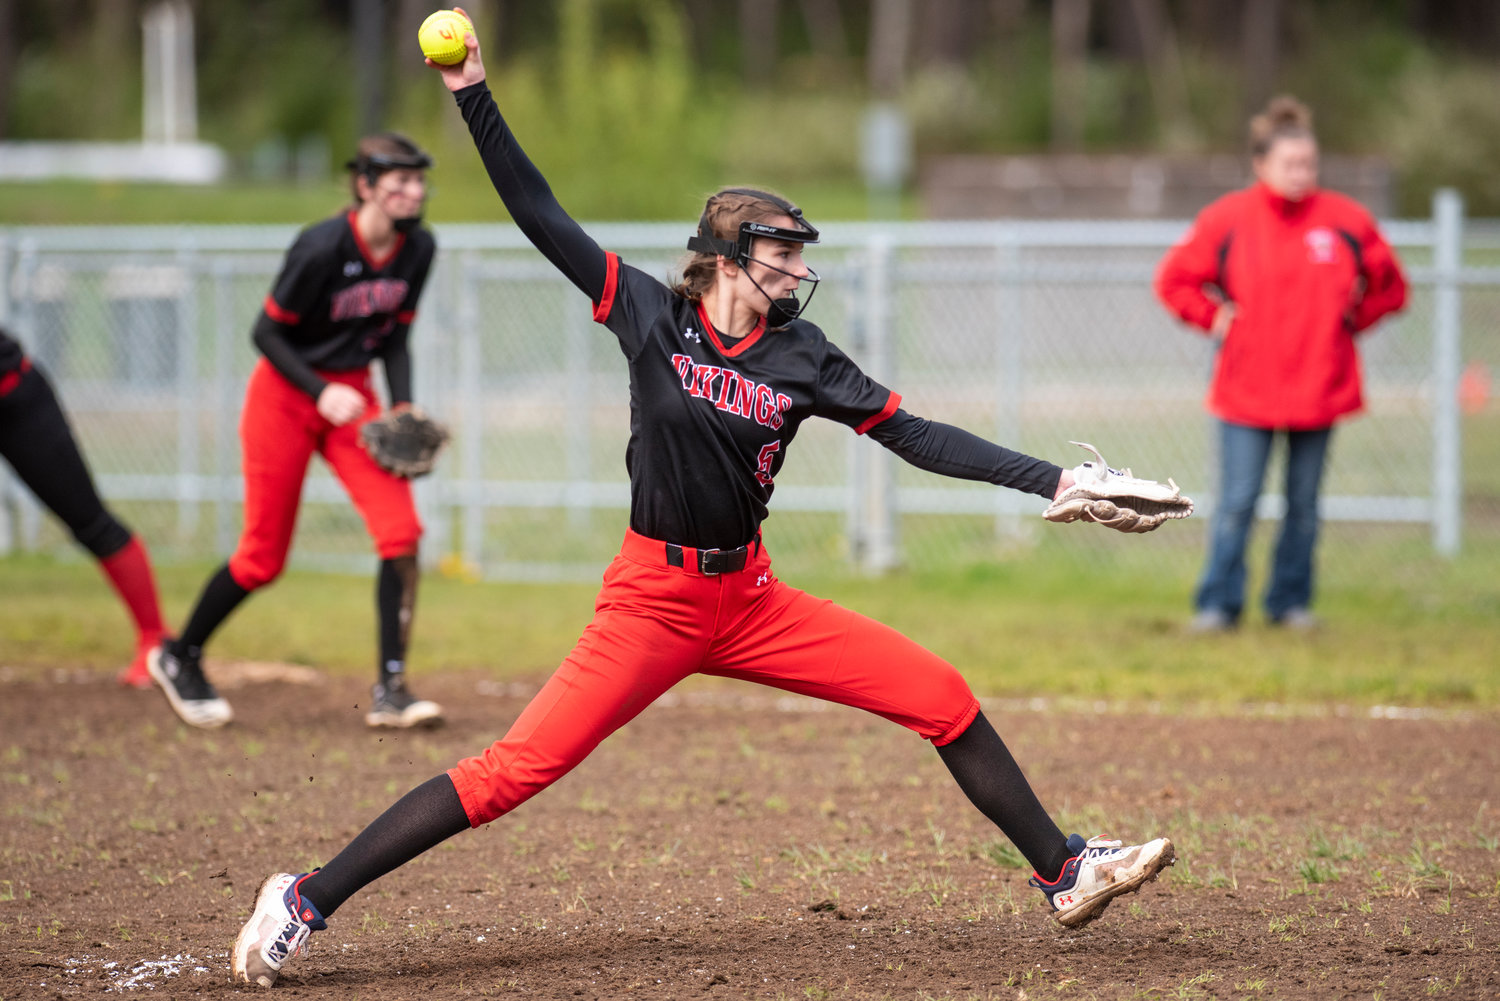 Mossyrock's Erin Cournyer winds up to deliver a pitch to an Oakville batter during a road game in Chehalis Village on April 28.